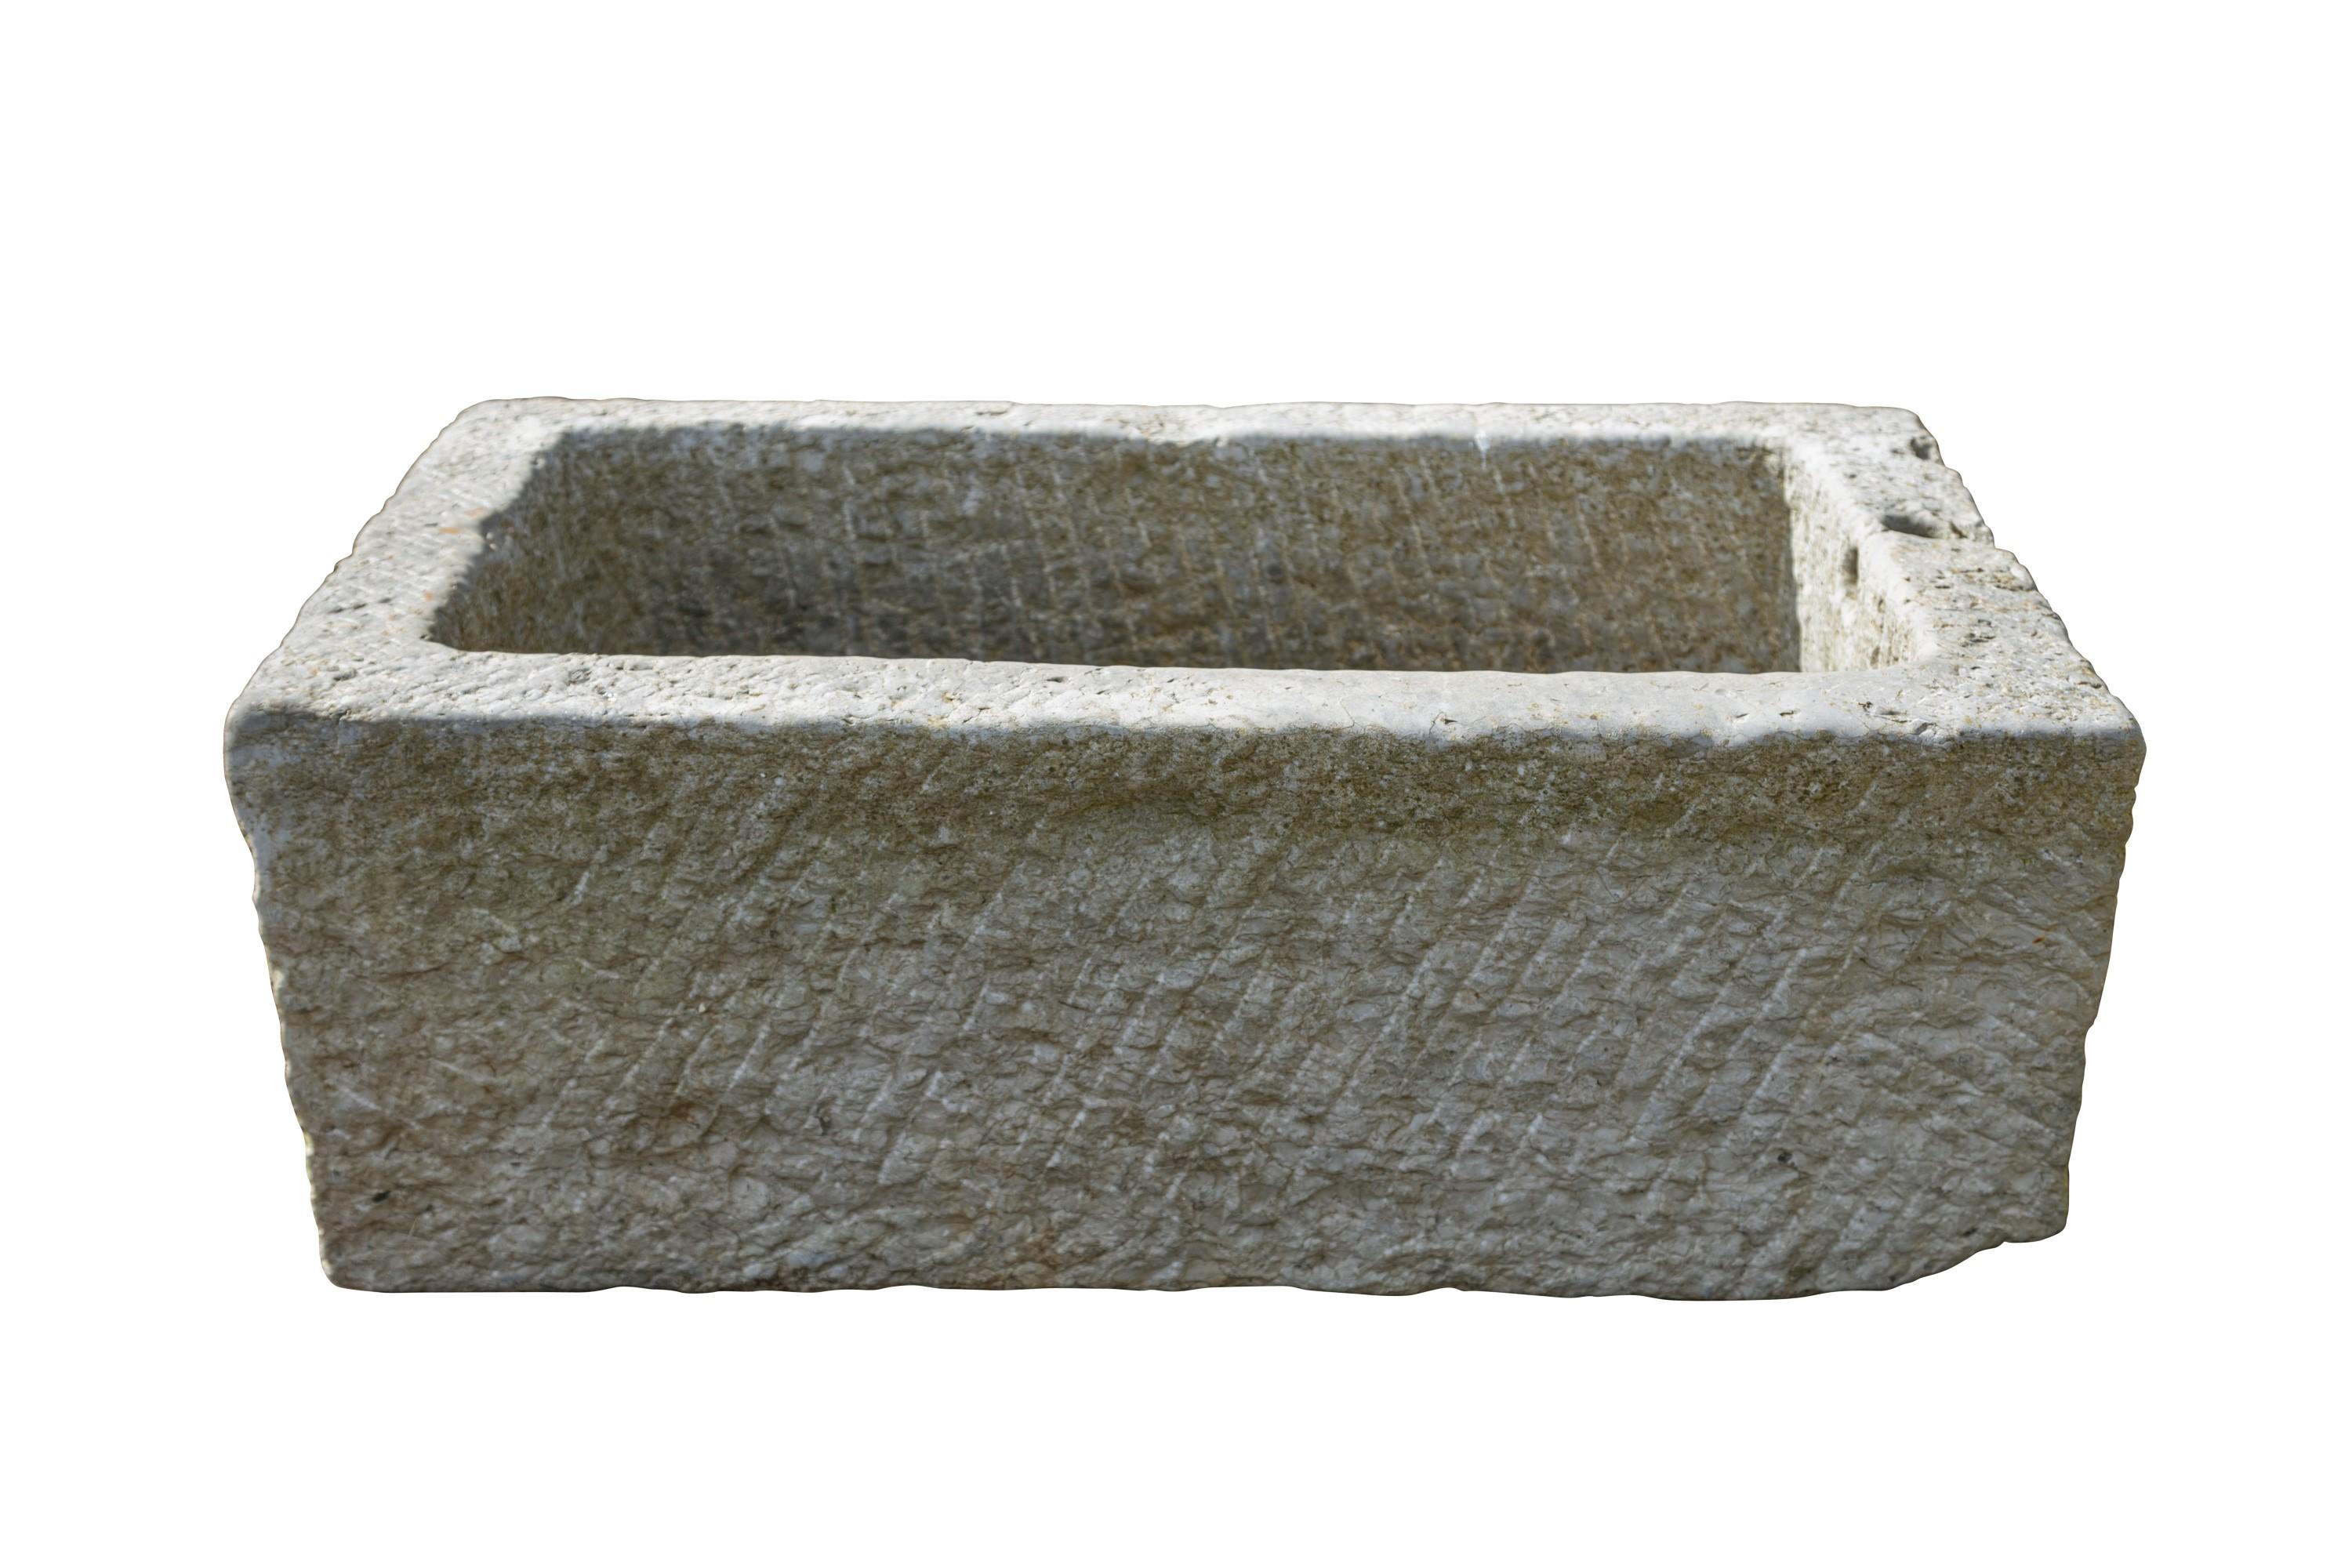 Mid-19th century solid marble bath. Used for washing horse’s feet. To use as a planter, the bath would require drainage holes which can be carried out on site
Weight approximate 220kg. Dimensions: 34 inches long.